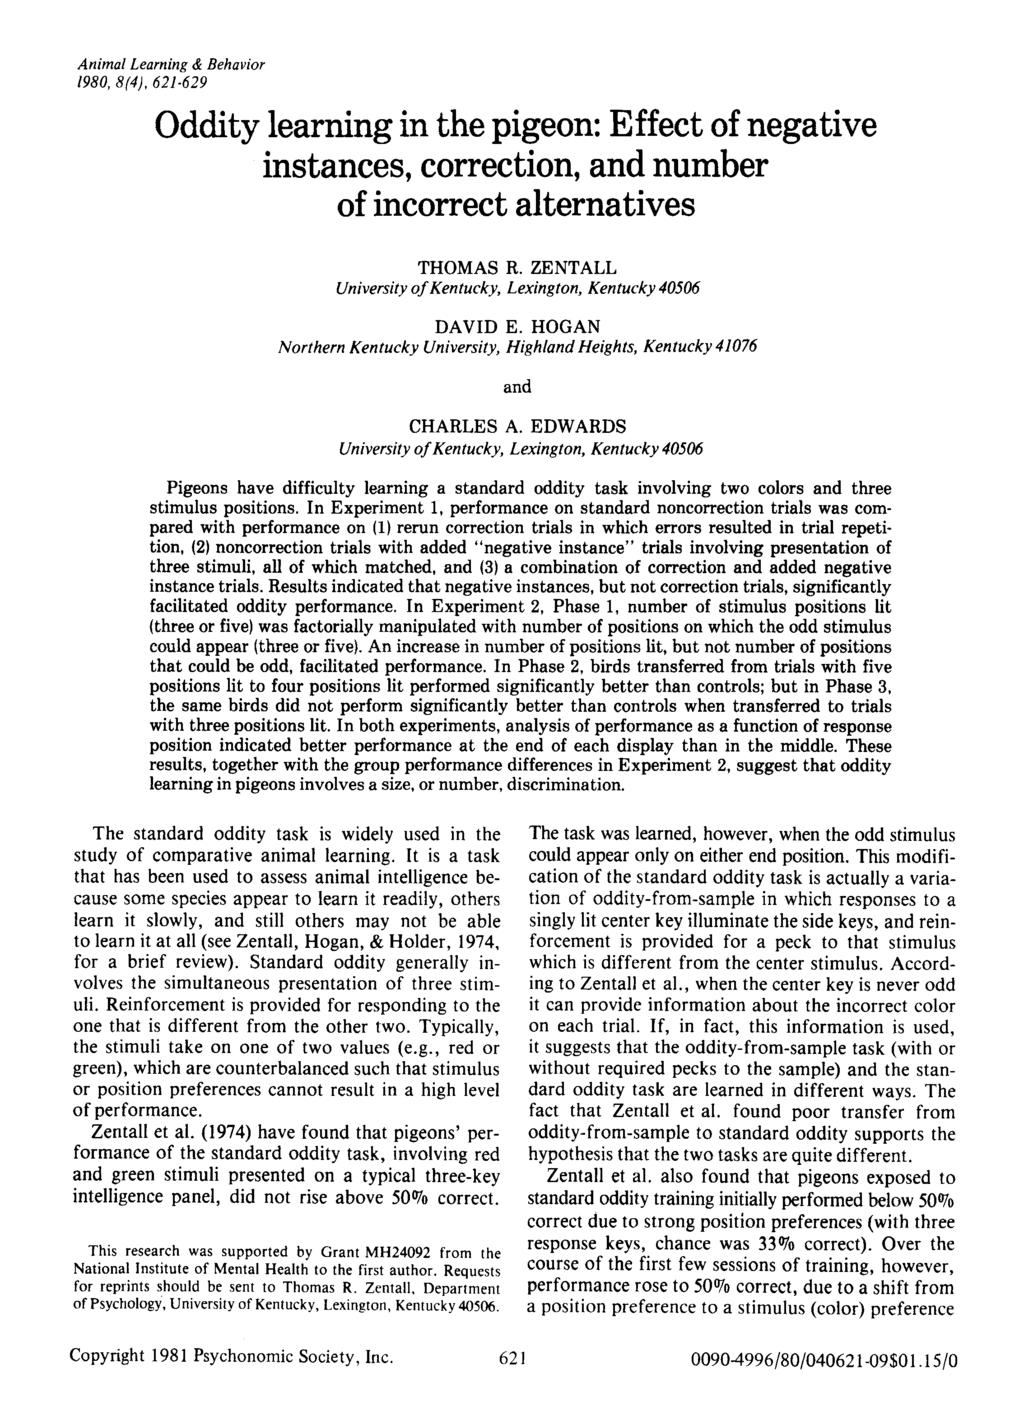 Animal Learning & Behavior 1980,8(4),621-629 Oddity learning in the pigeon: Effect of negative instances, correction, and number of incorrect alternatives THOMAS R.